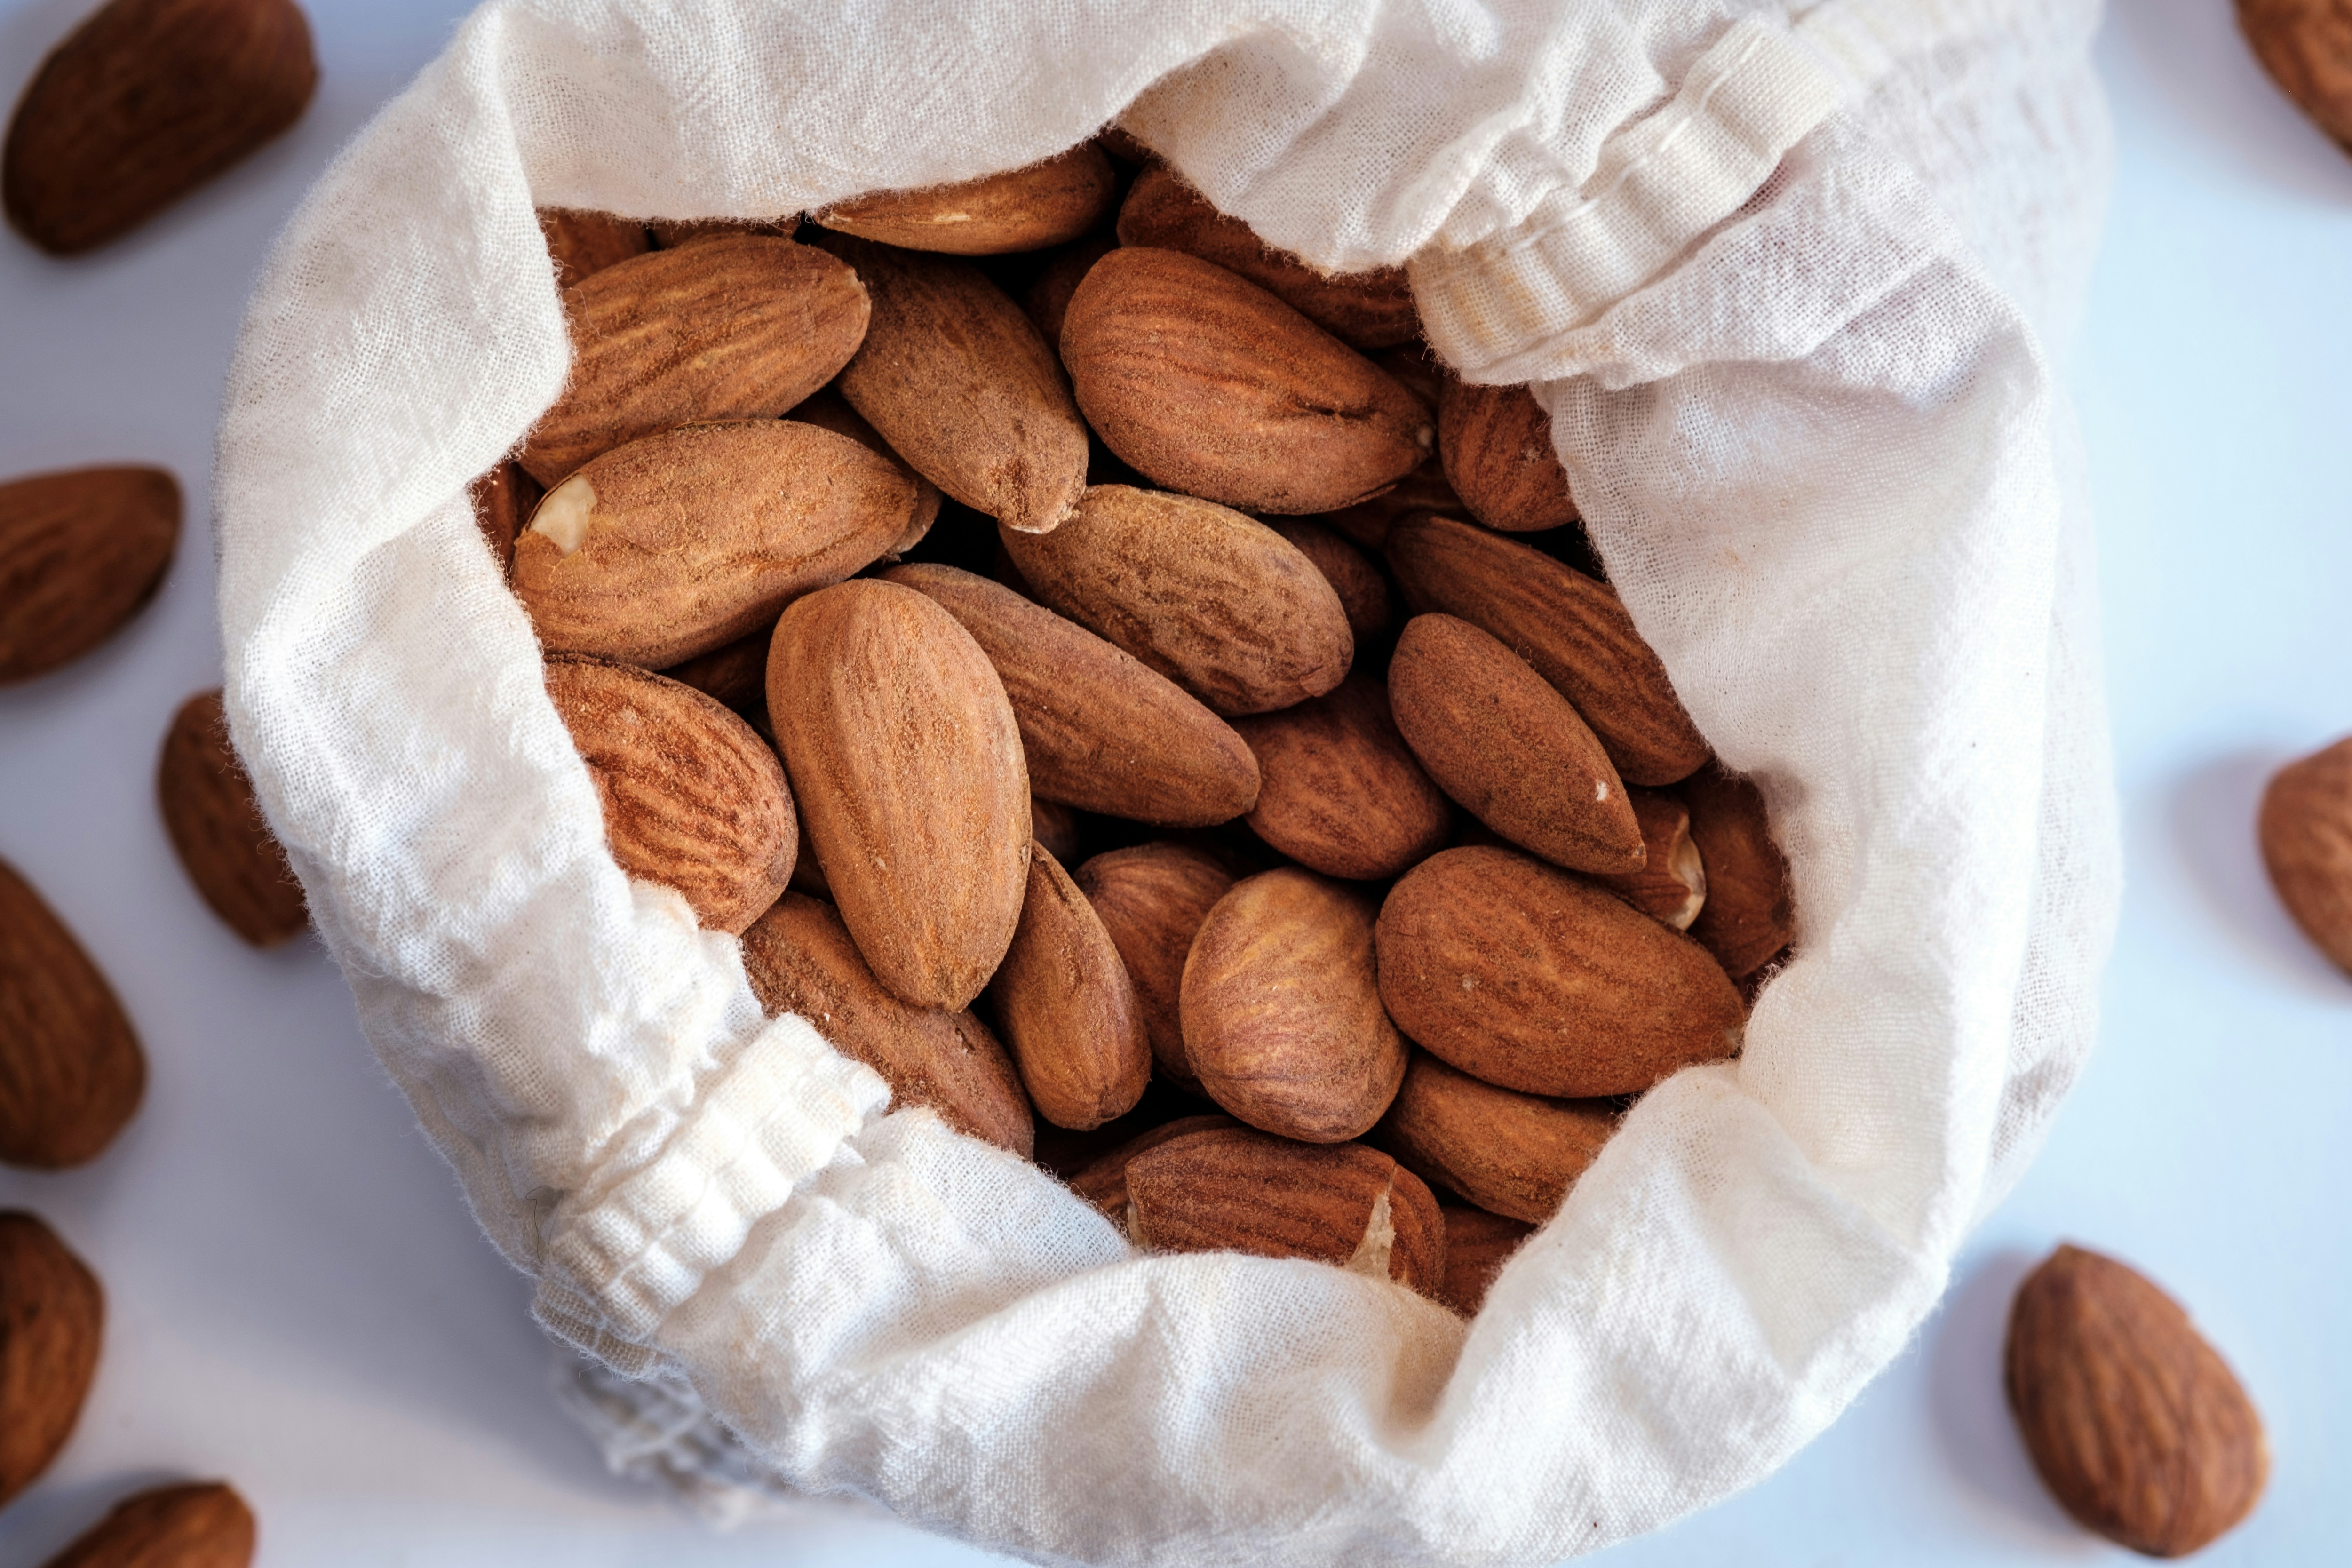 Almonds are a powerhouse of nutrients that help with hair growth and nutrition